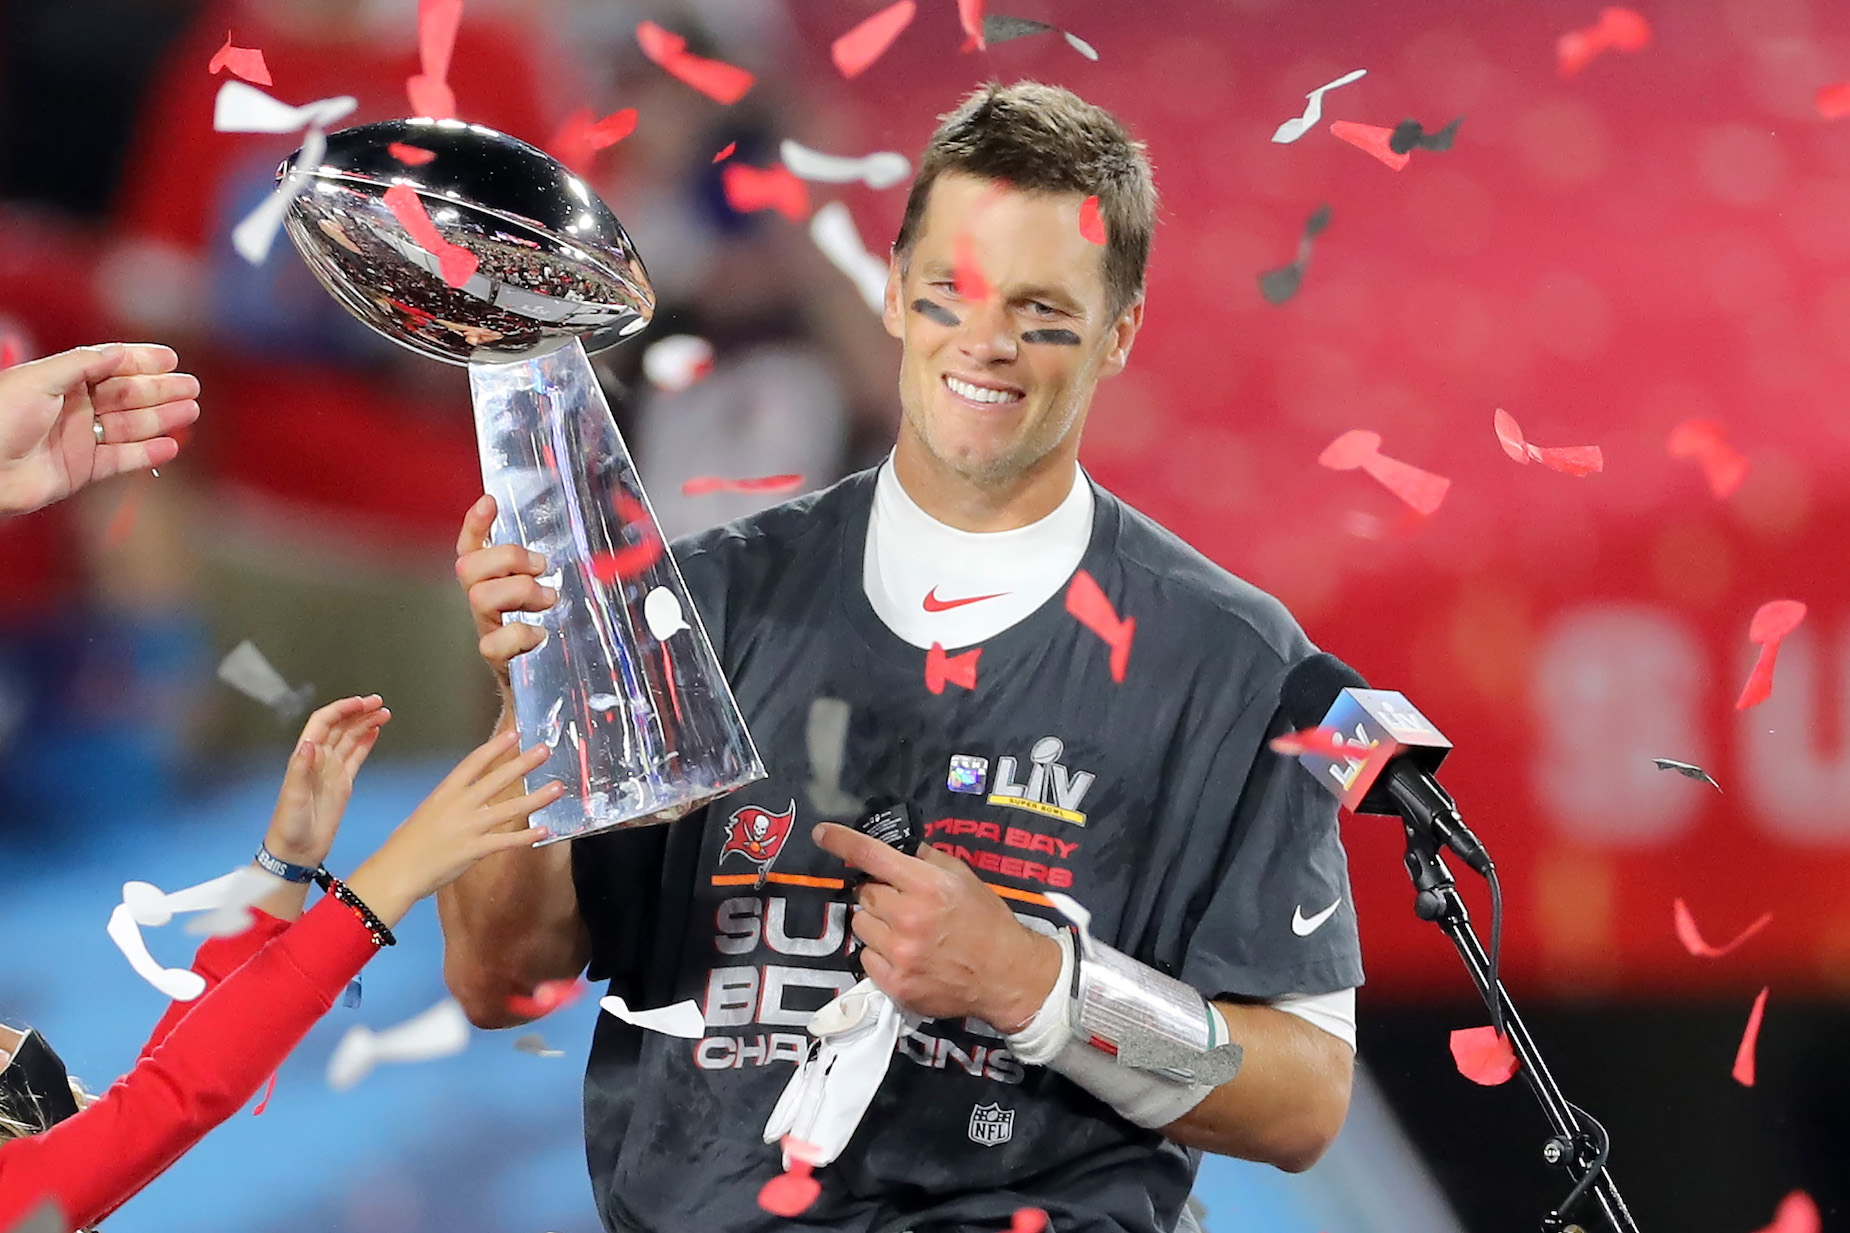 Tampa Bay Buccaneers quarterback Tom Brady lifts the Lombardi Trophy after victory in Super Bowl 55